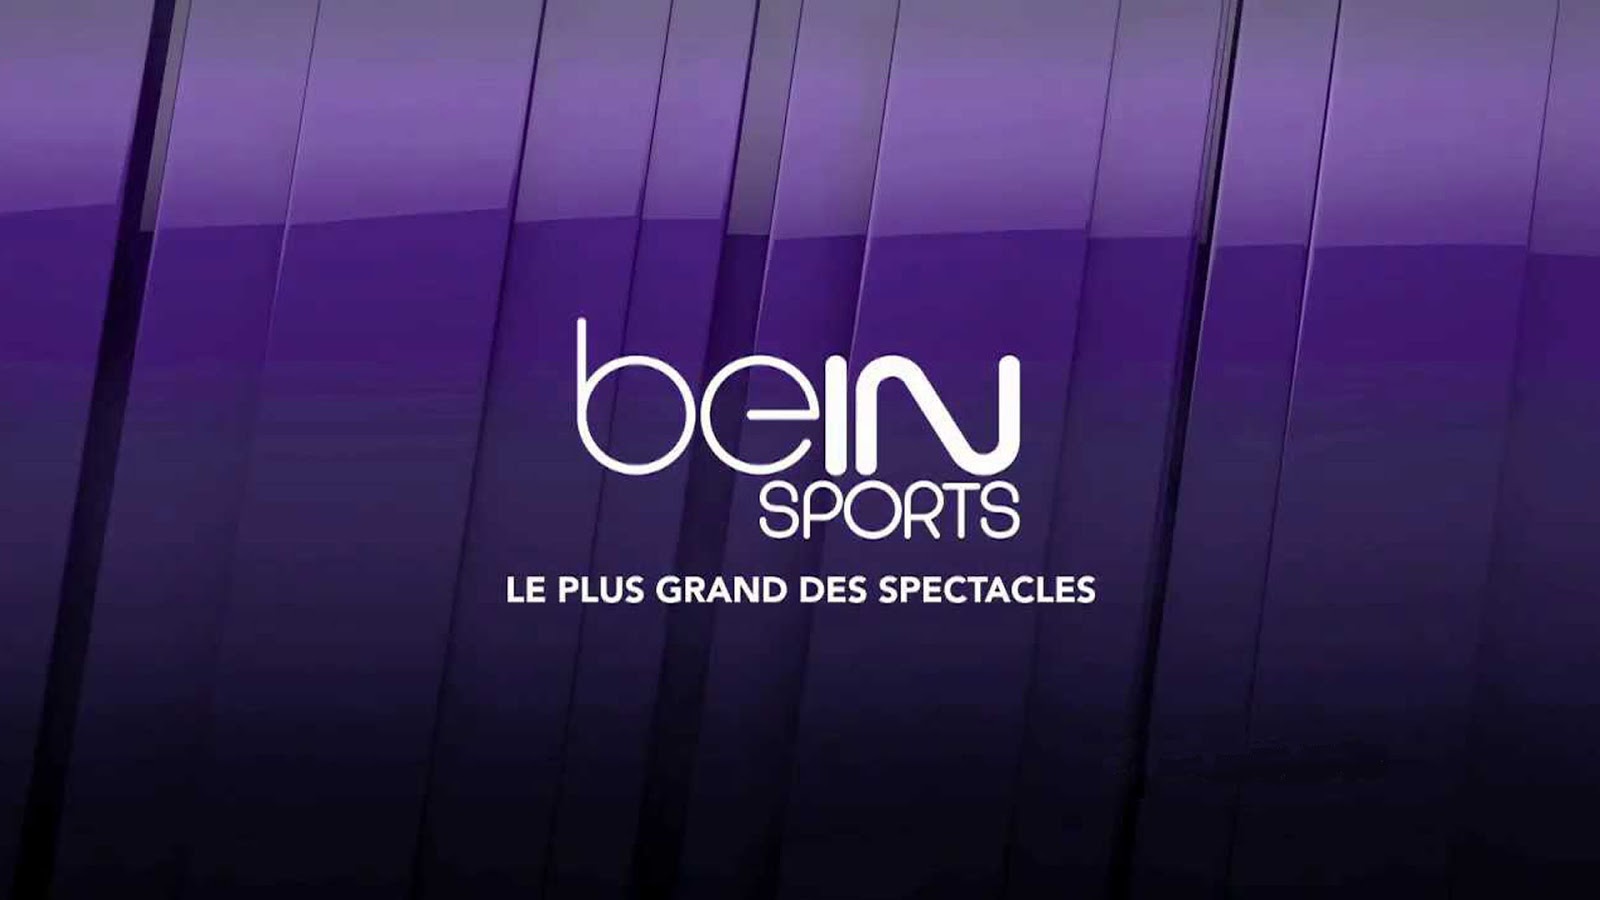 beIN SPORTS France - Astra Frequency - Freqode.com